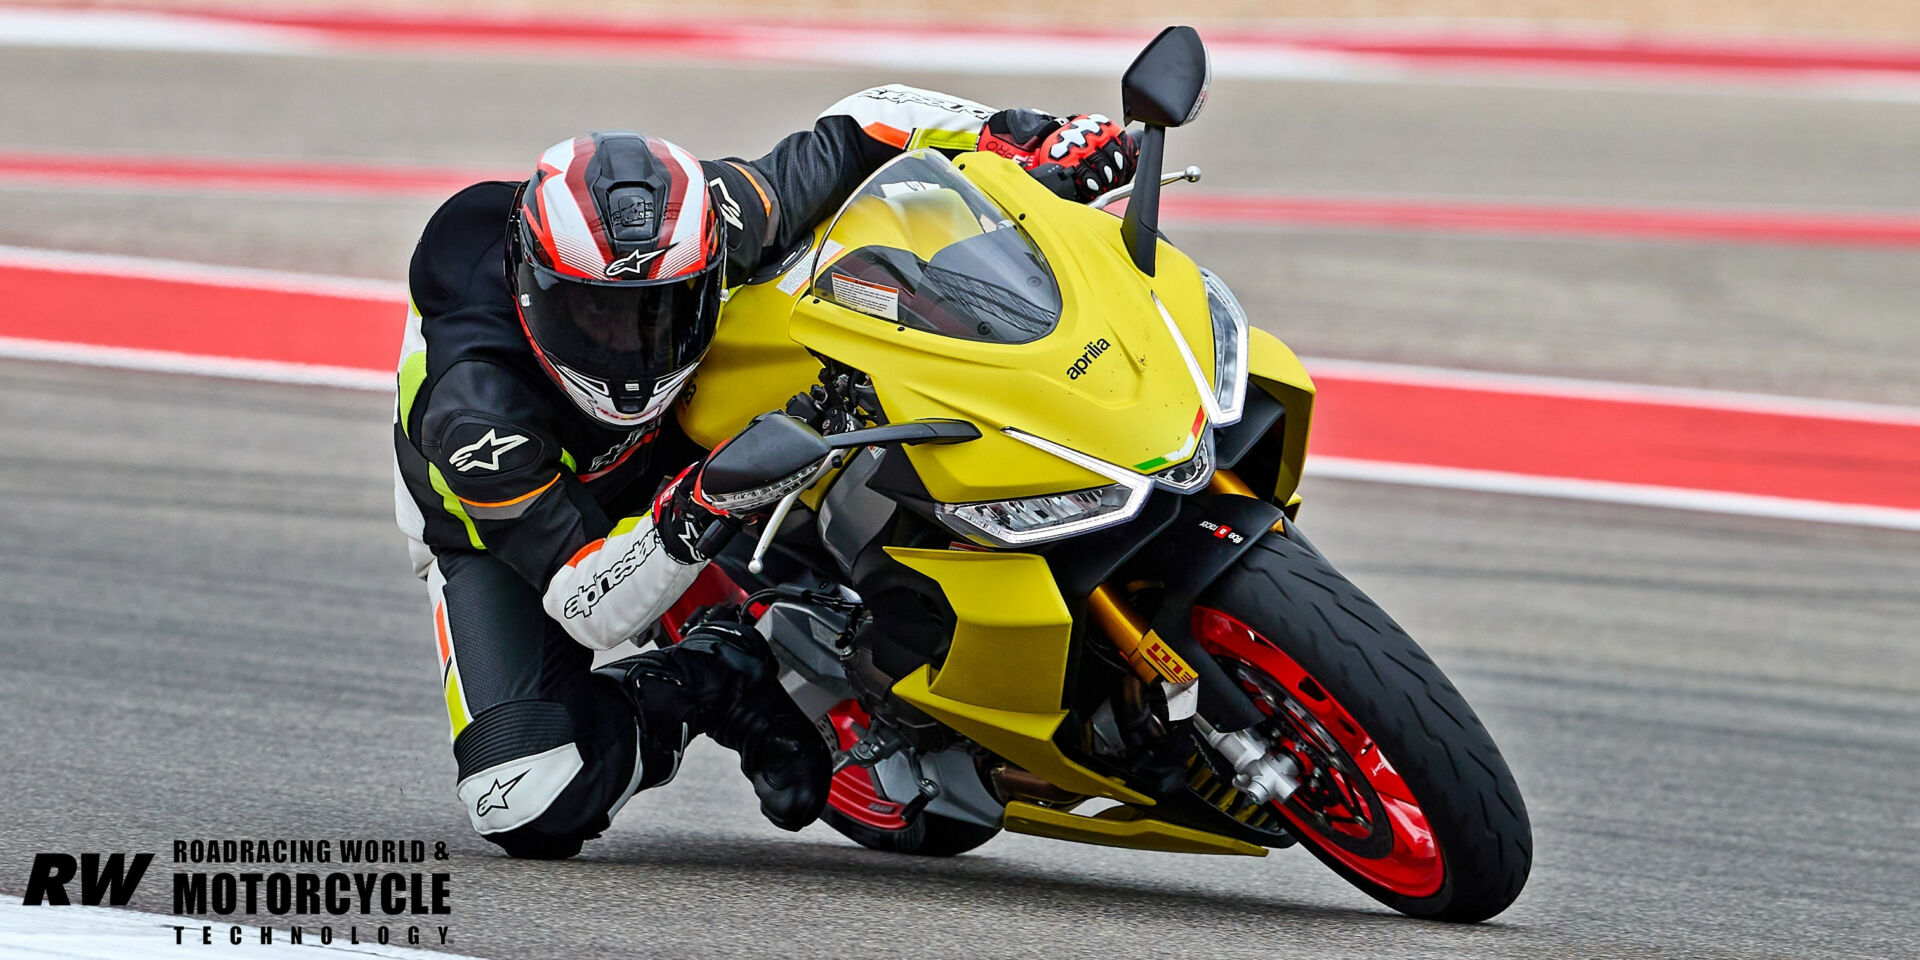 The author wearing the Alpinestars Tech-Air 7X system at an Aprilia Racer Days event held in conjunction with RideSmart Motorcycle School at Circuit of The Americas. Photo courtesy Alpinestars.